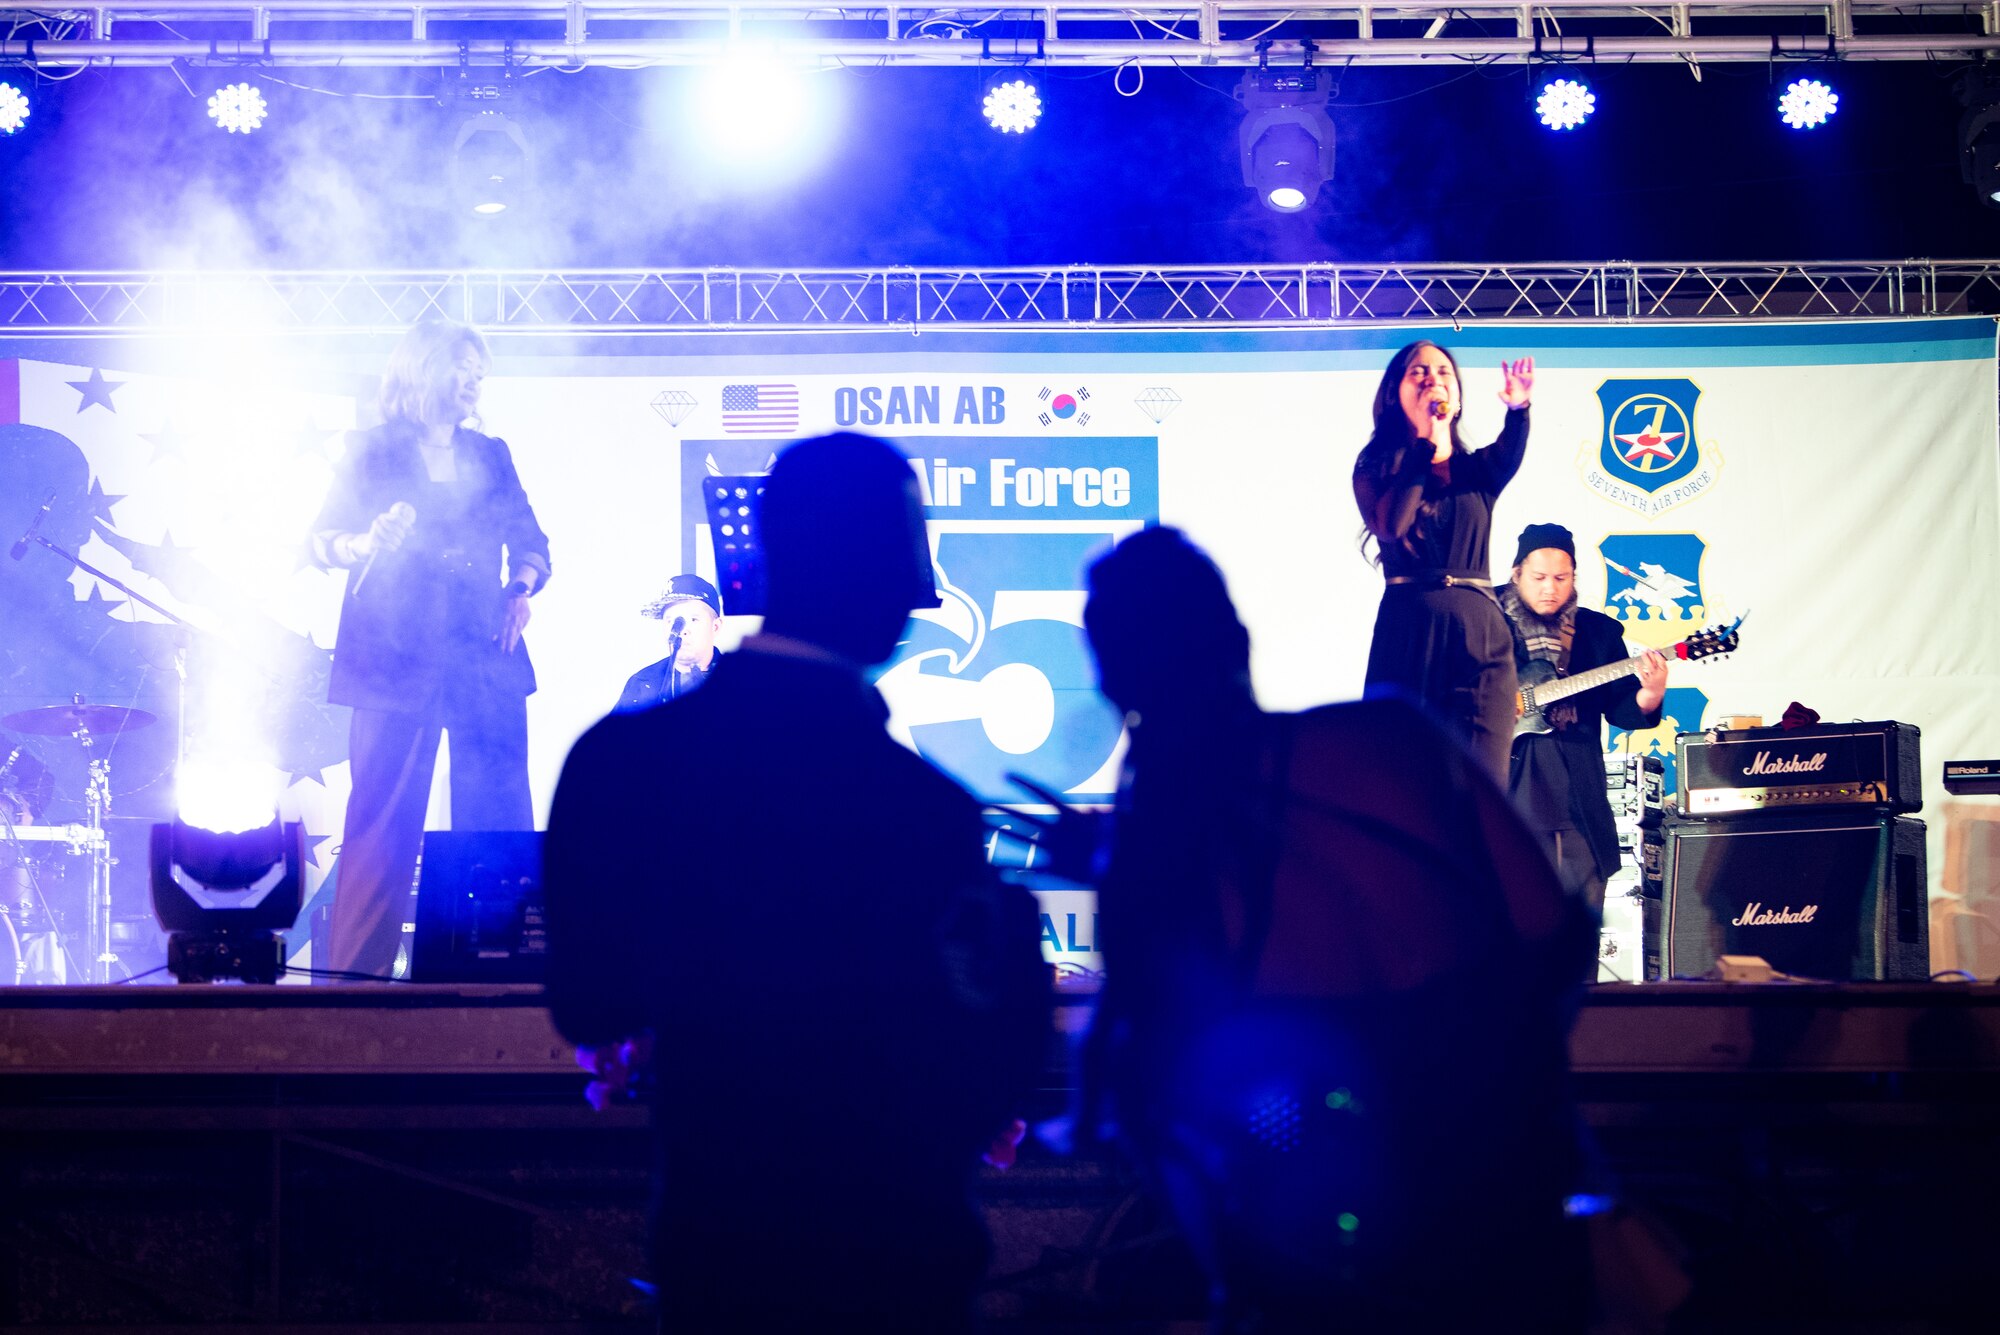 Attendees dance to a live performance by “Street Beat” during the 75th Air Force Ball at Osan Air Base, Republic of Korea, Oct. 15th, 2022.